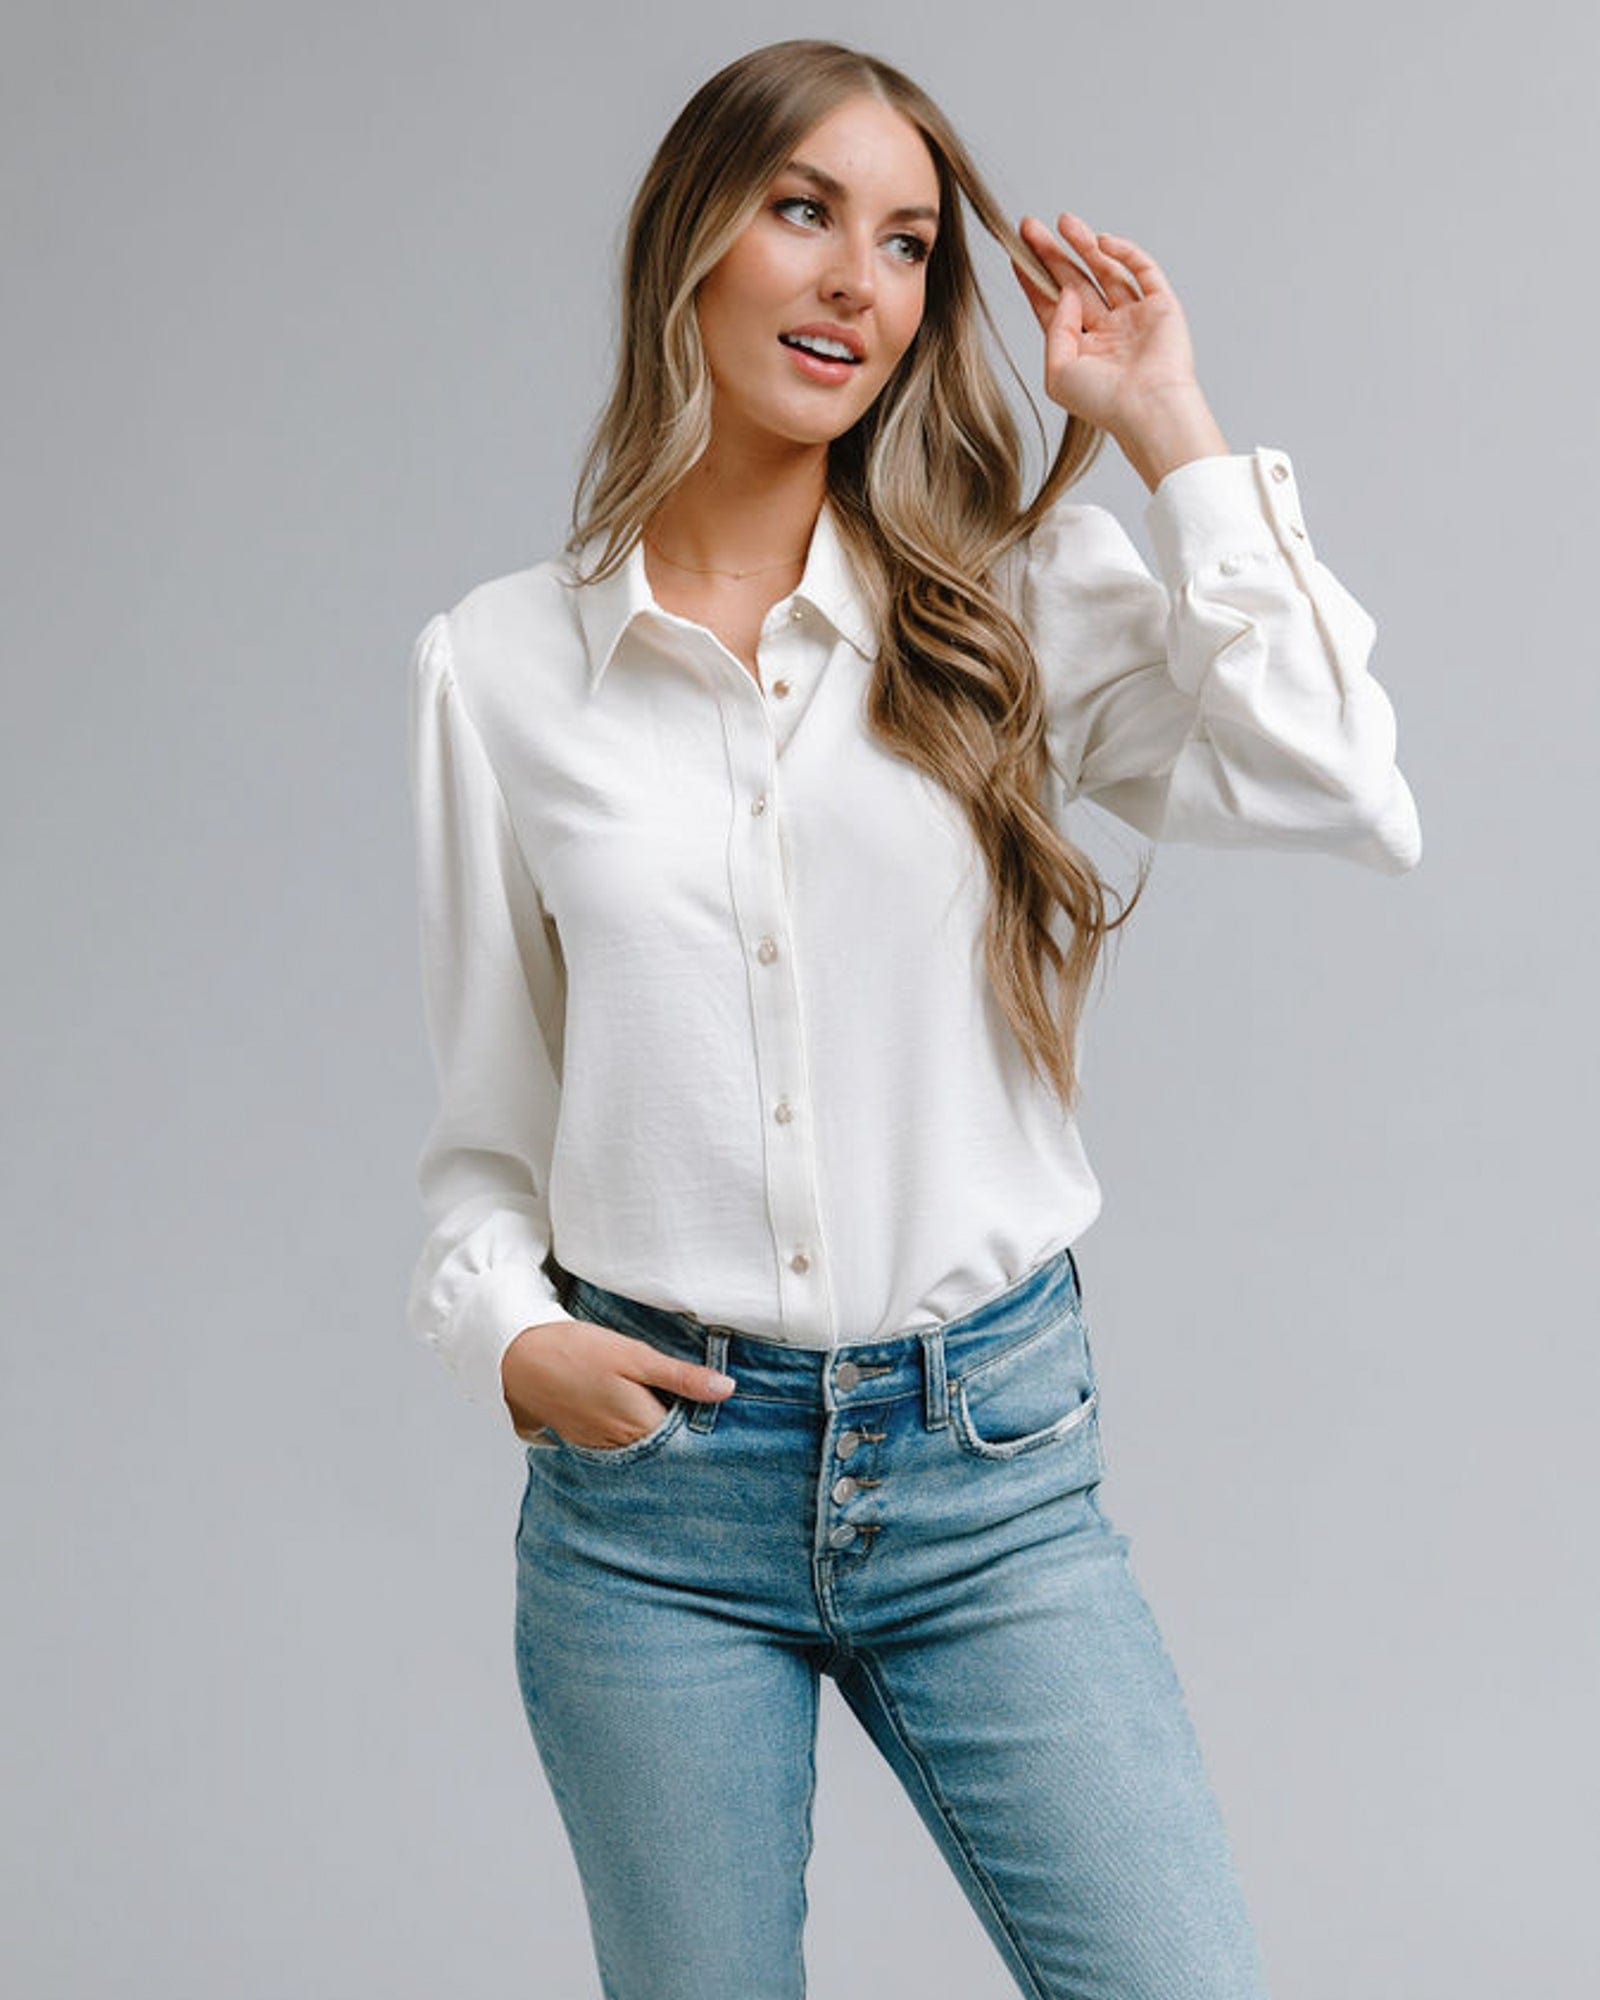 Woman in a long sleeve, collared, white button-down blouse